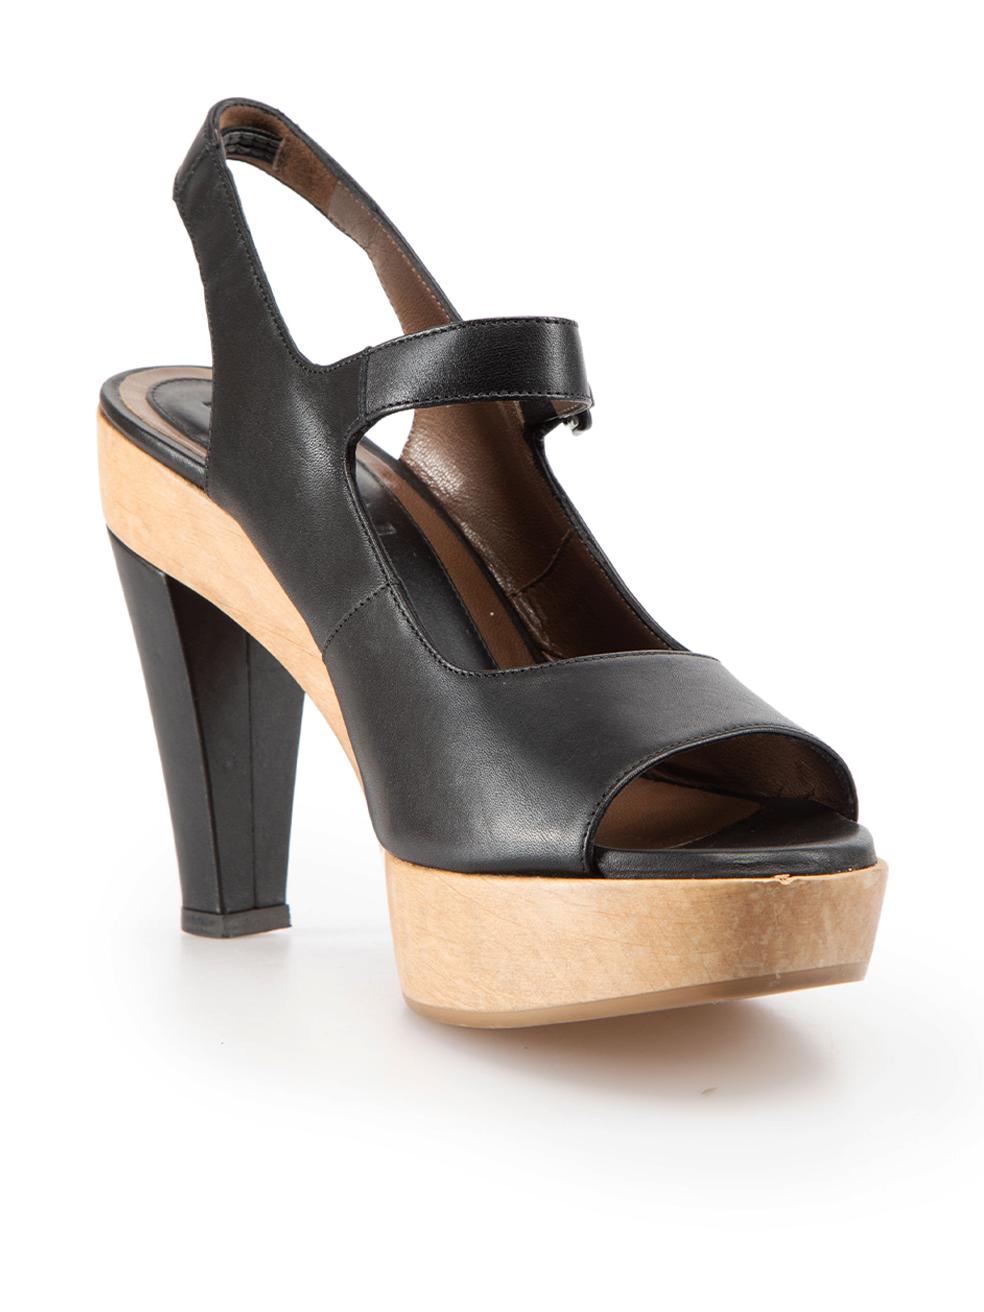 CONDITION is Very good. Minimal wear to shoes is evident. Minimal wear to both heels with light indents to the leather, and the wooden platforms of both shoes have water marks on this used Marni designer resale item. These shoes come with original